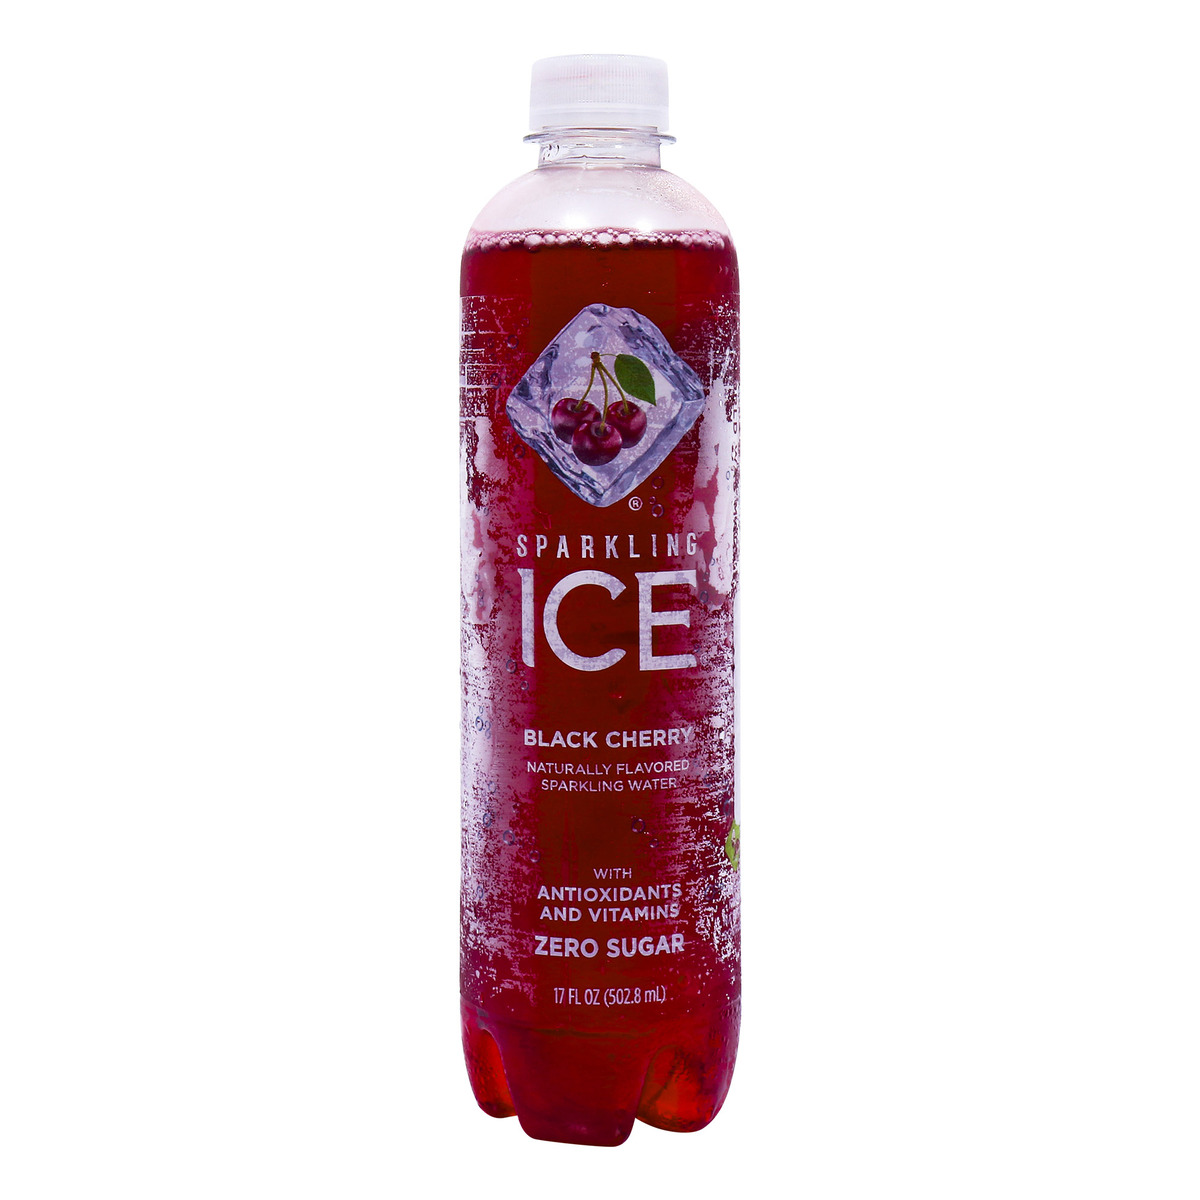 Ice Black Cherry Naturally Flavored Sparkling Water 502.8ml